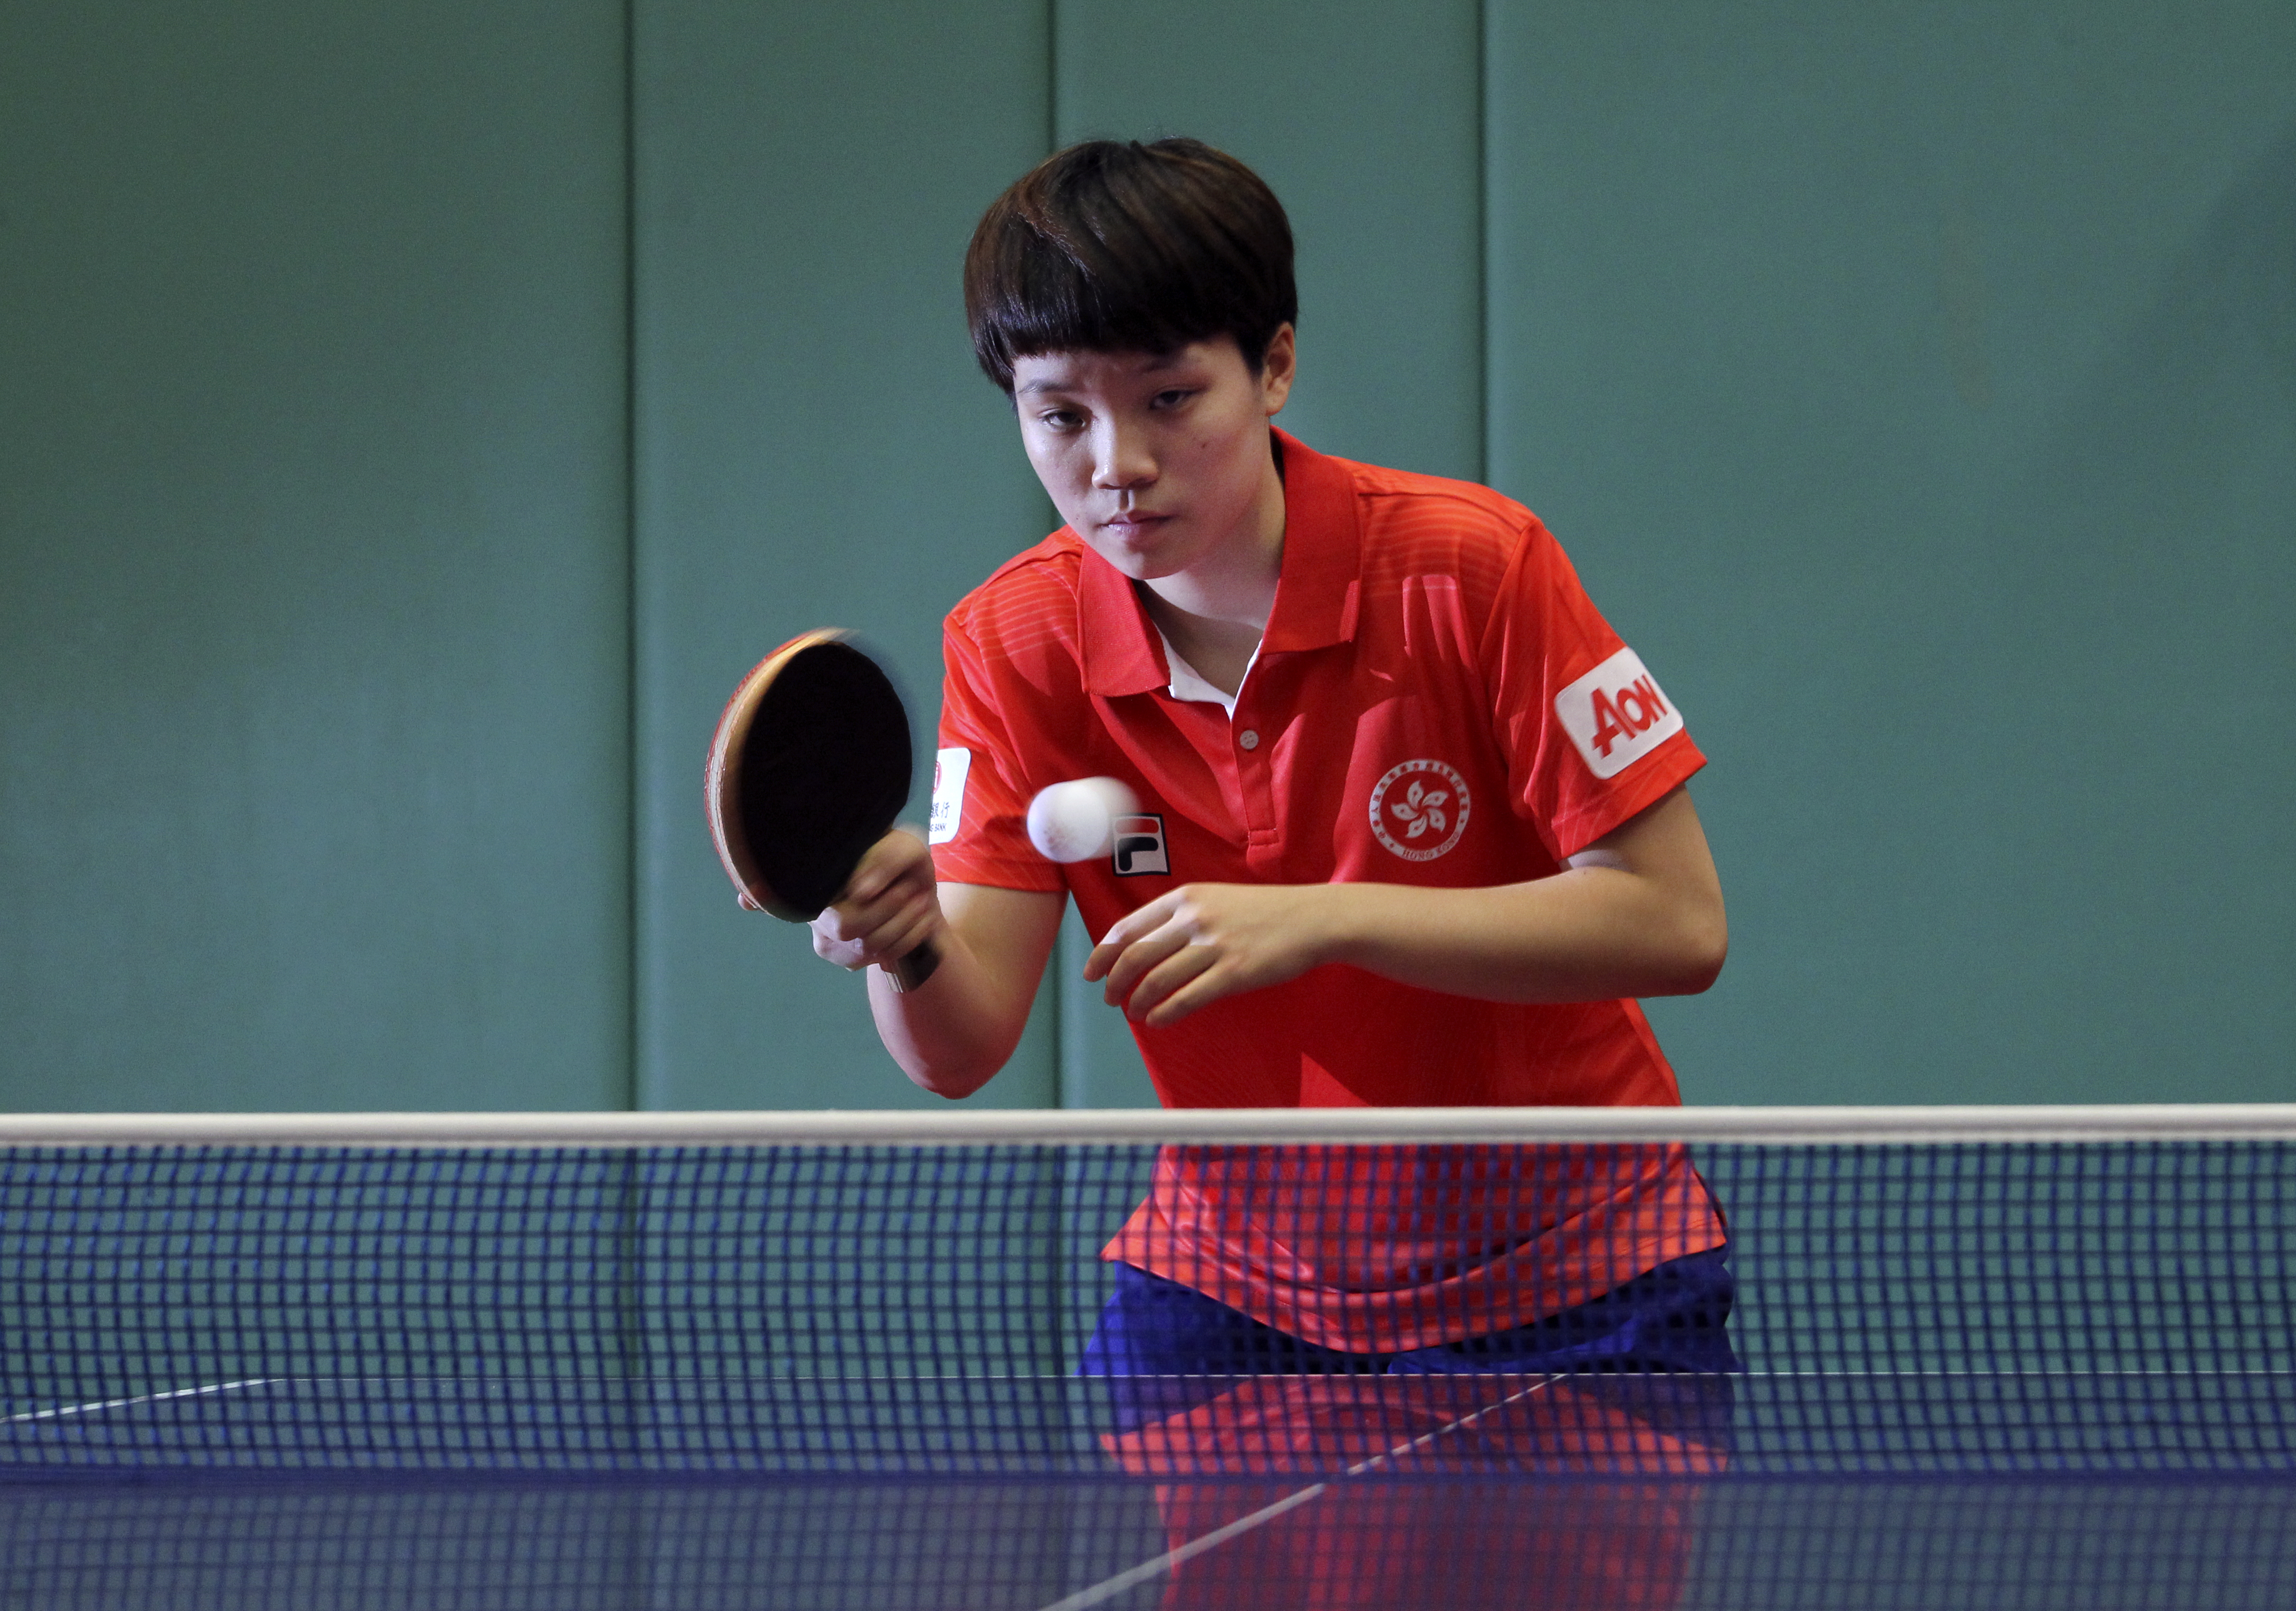 Doo Hoi-kem will test her skills against the best in Suzhou at the 2015 World Table Tennis Championship from April 26 to May 3.